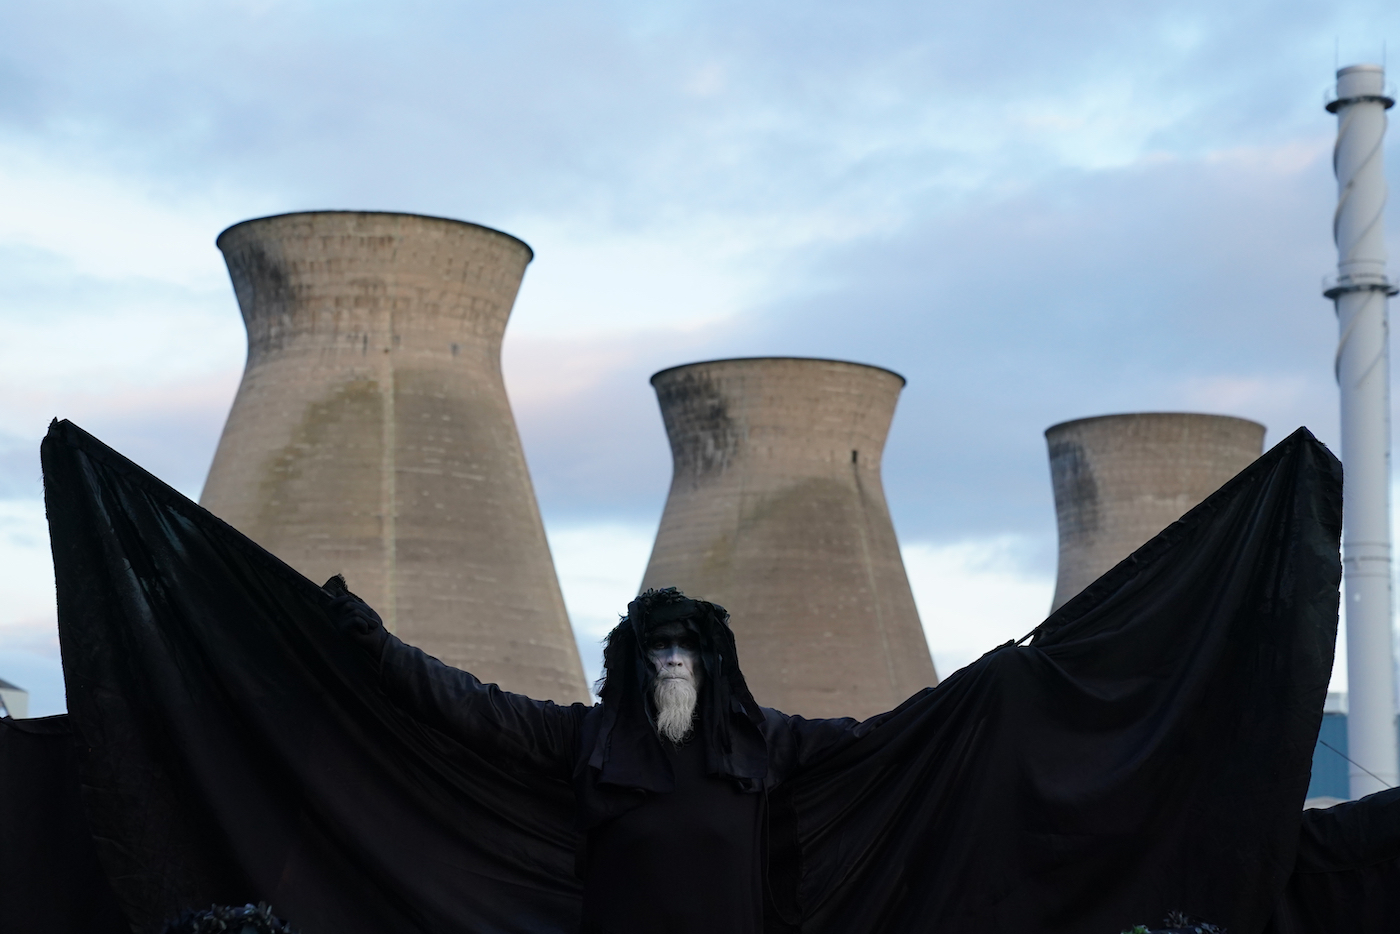 An activist in a black cape with arms outstretched like a bat stands in front of an oil refinery